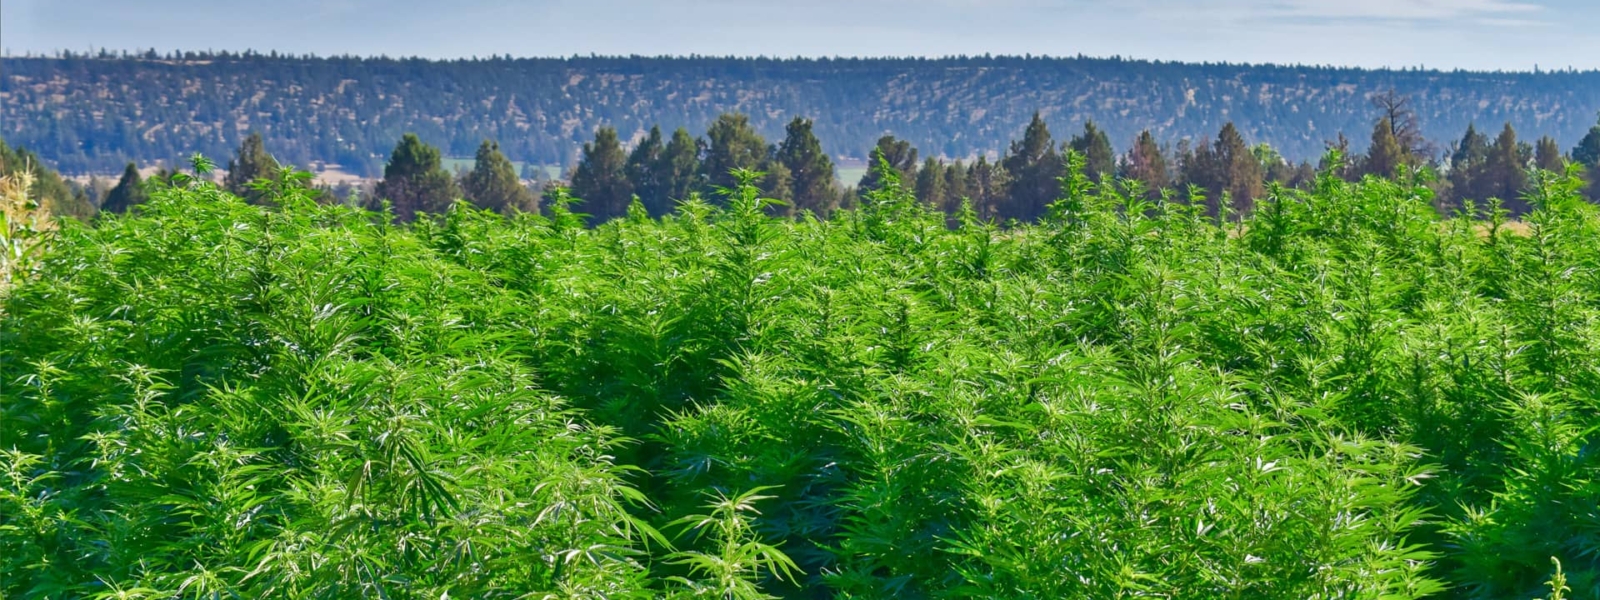 An organic hemp farm field in central Oregon with hills and sky in the background